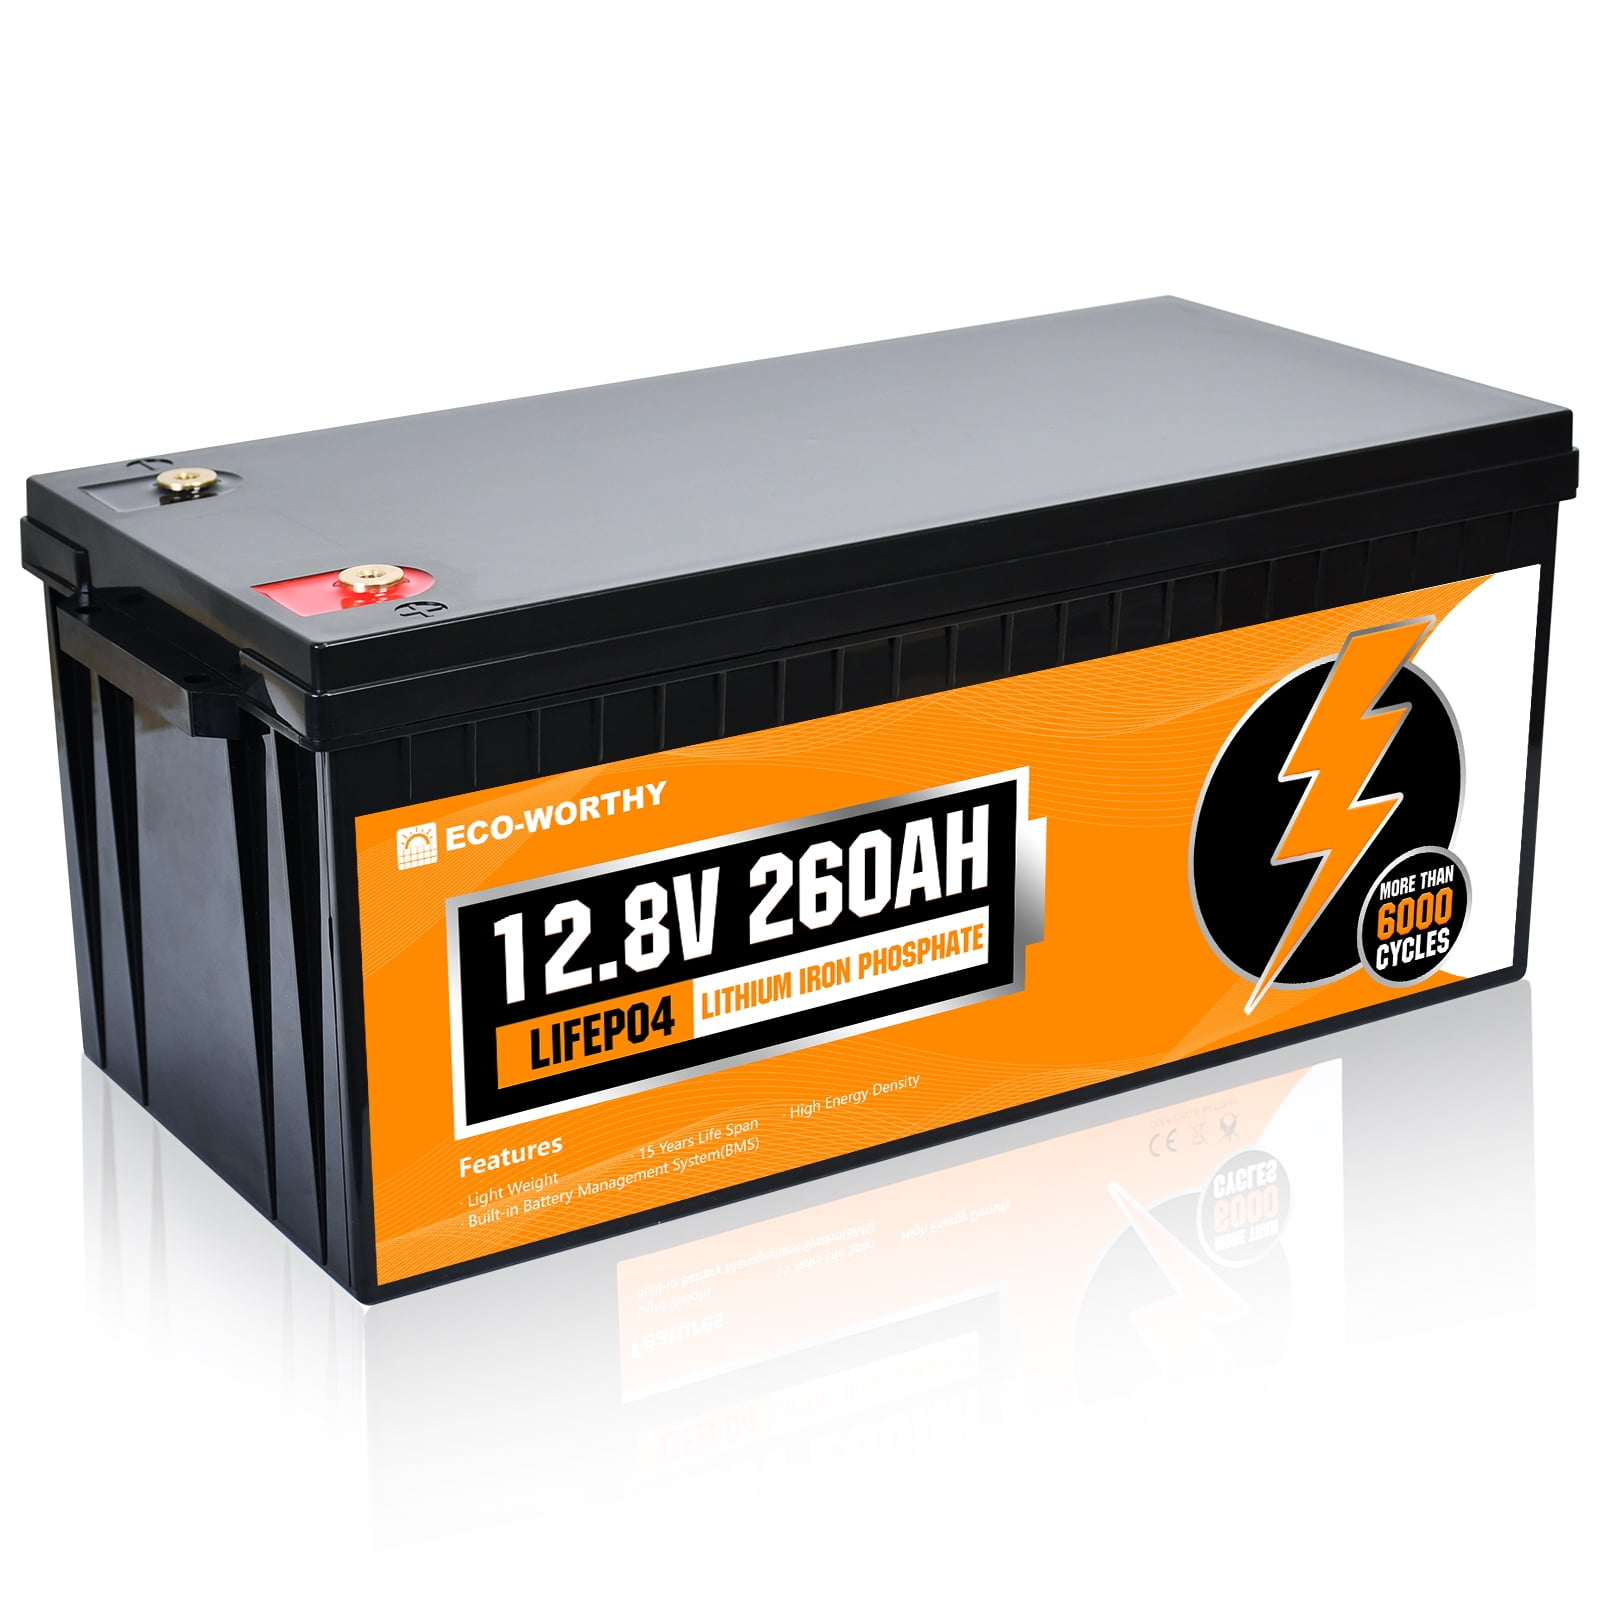 Eco-worthy 48Volts 50Ah LiFePO4 Lithium Battery Deep Cycles for RV